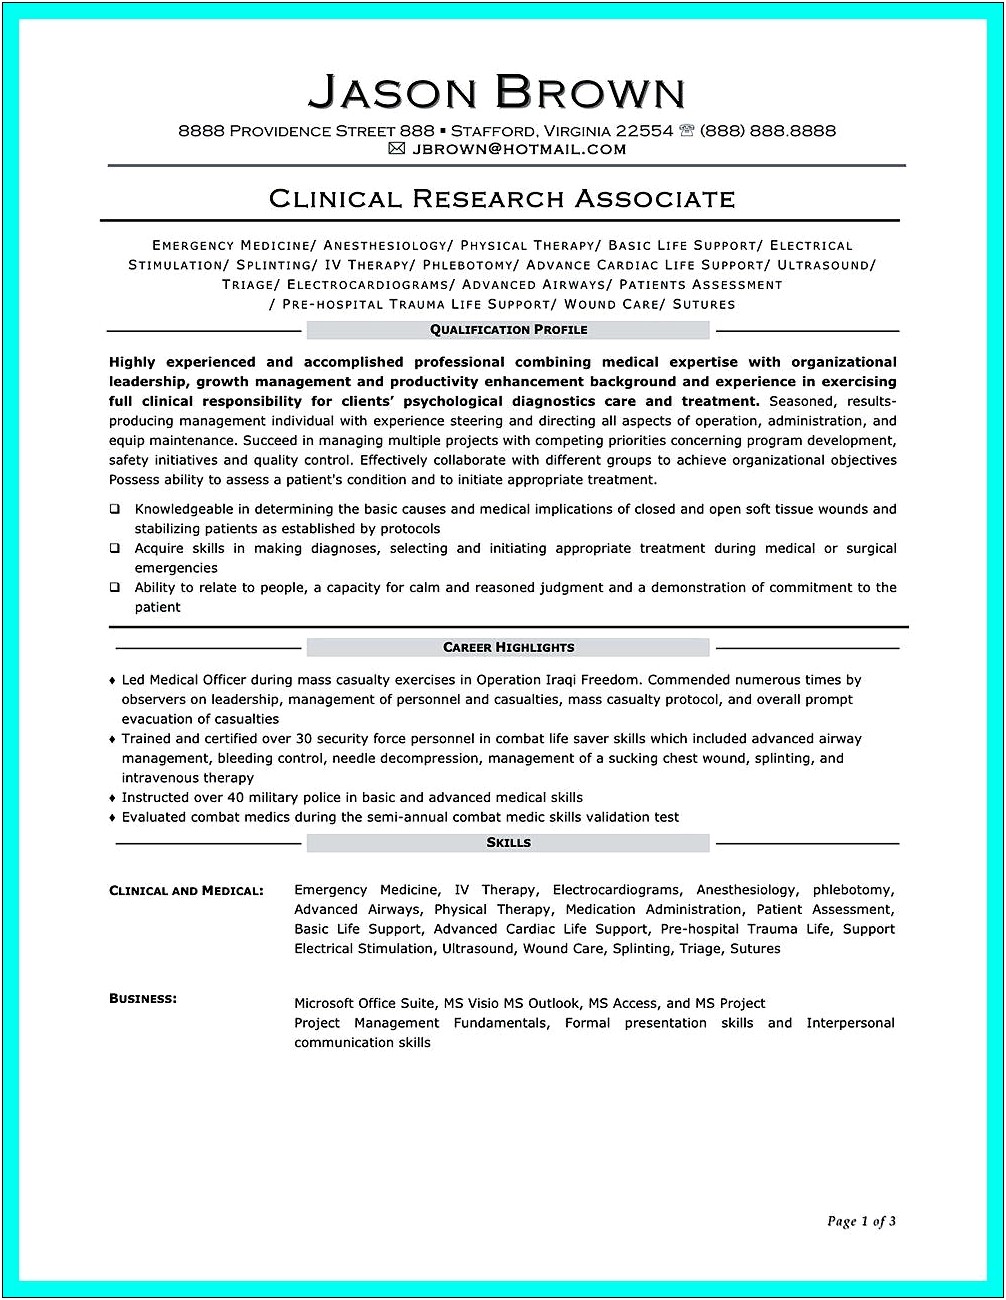 Clinical Research Project Management Resume